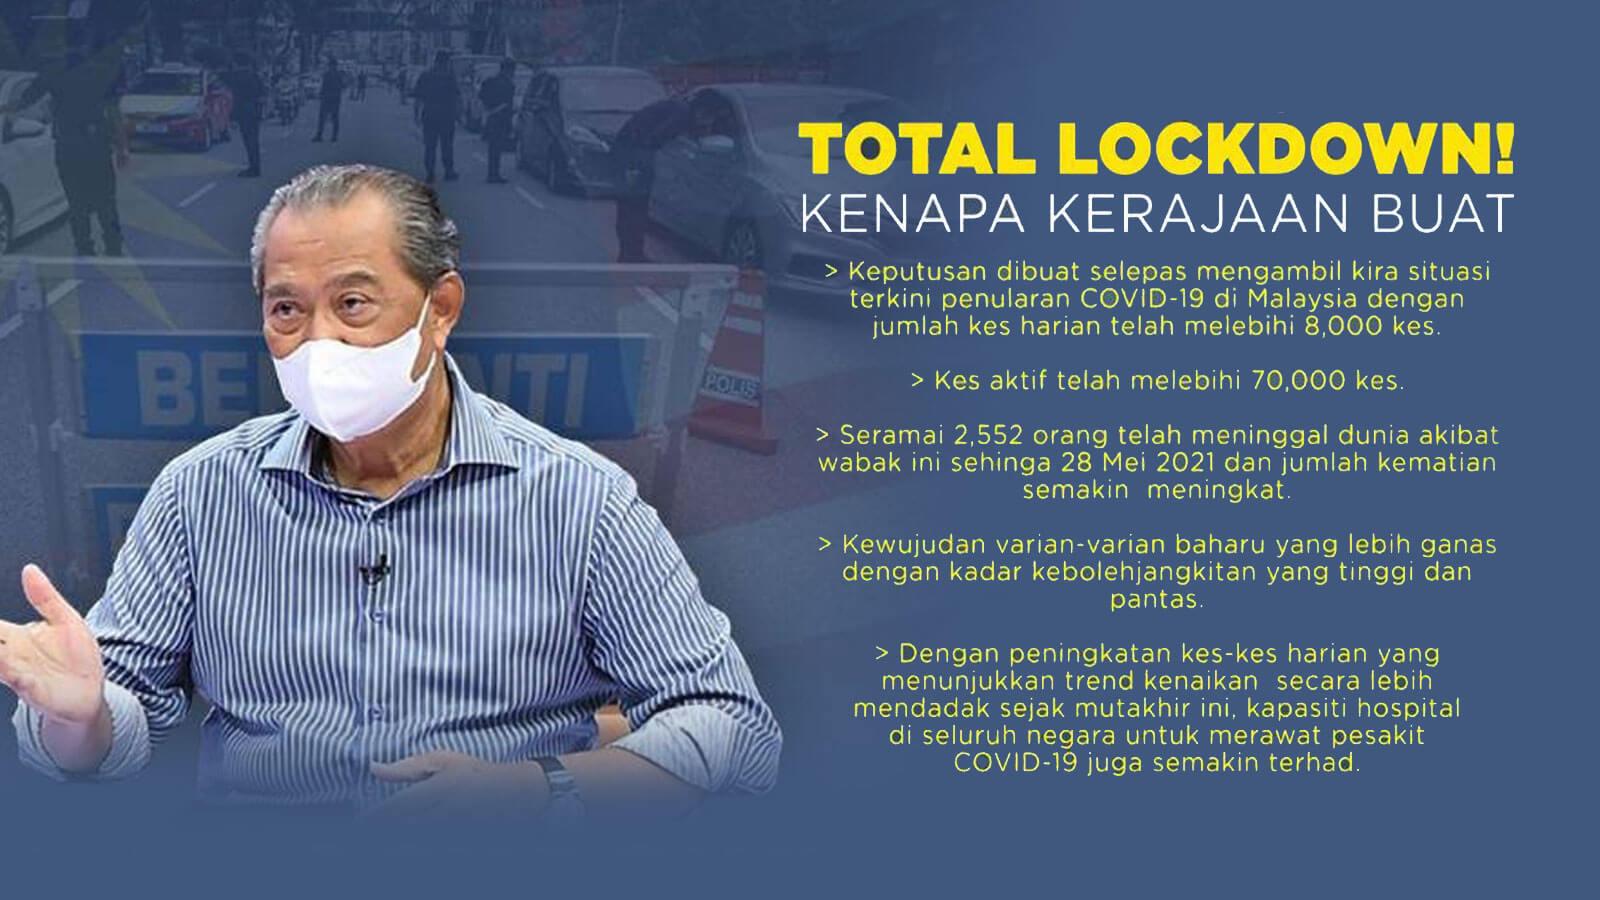 Featured image for “3 things employers should note about Malaysia’s total lockdown (PKP Fasa) from 1 June 2021”